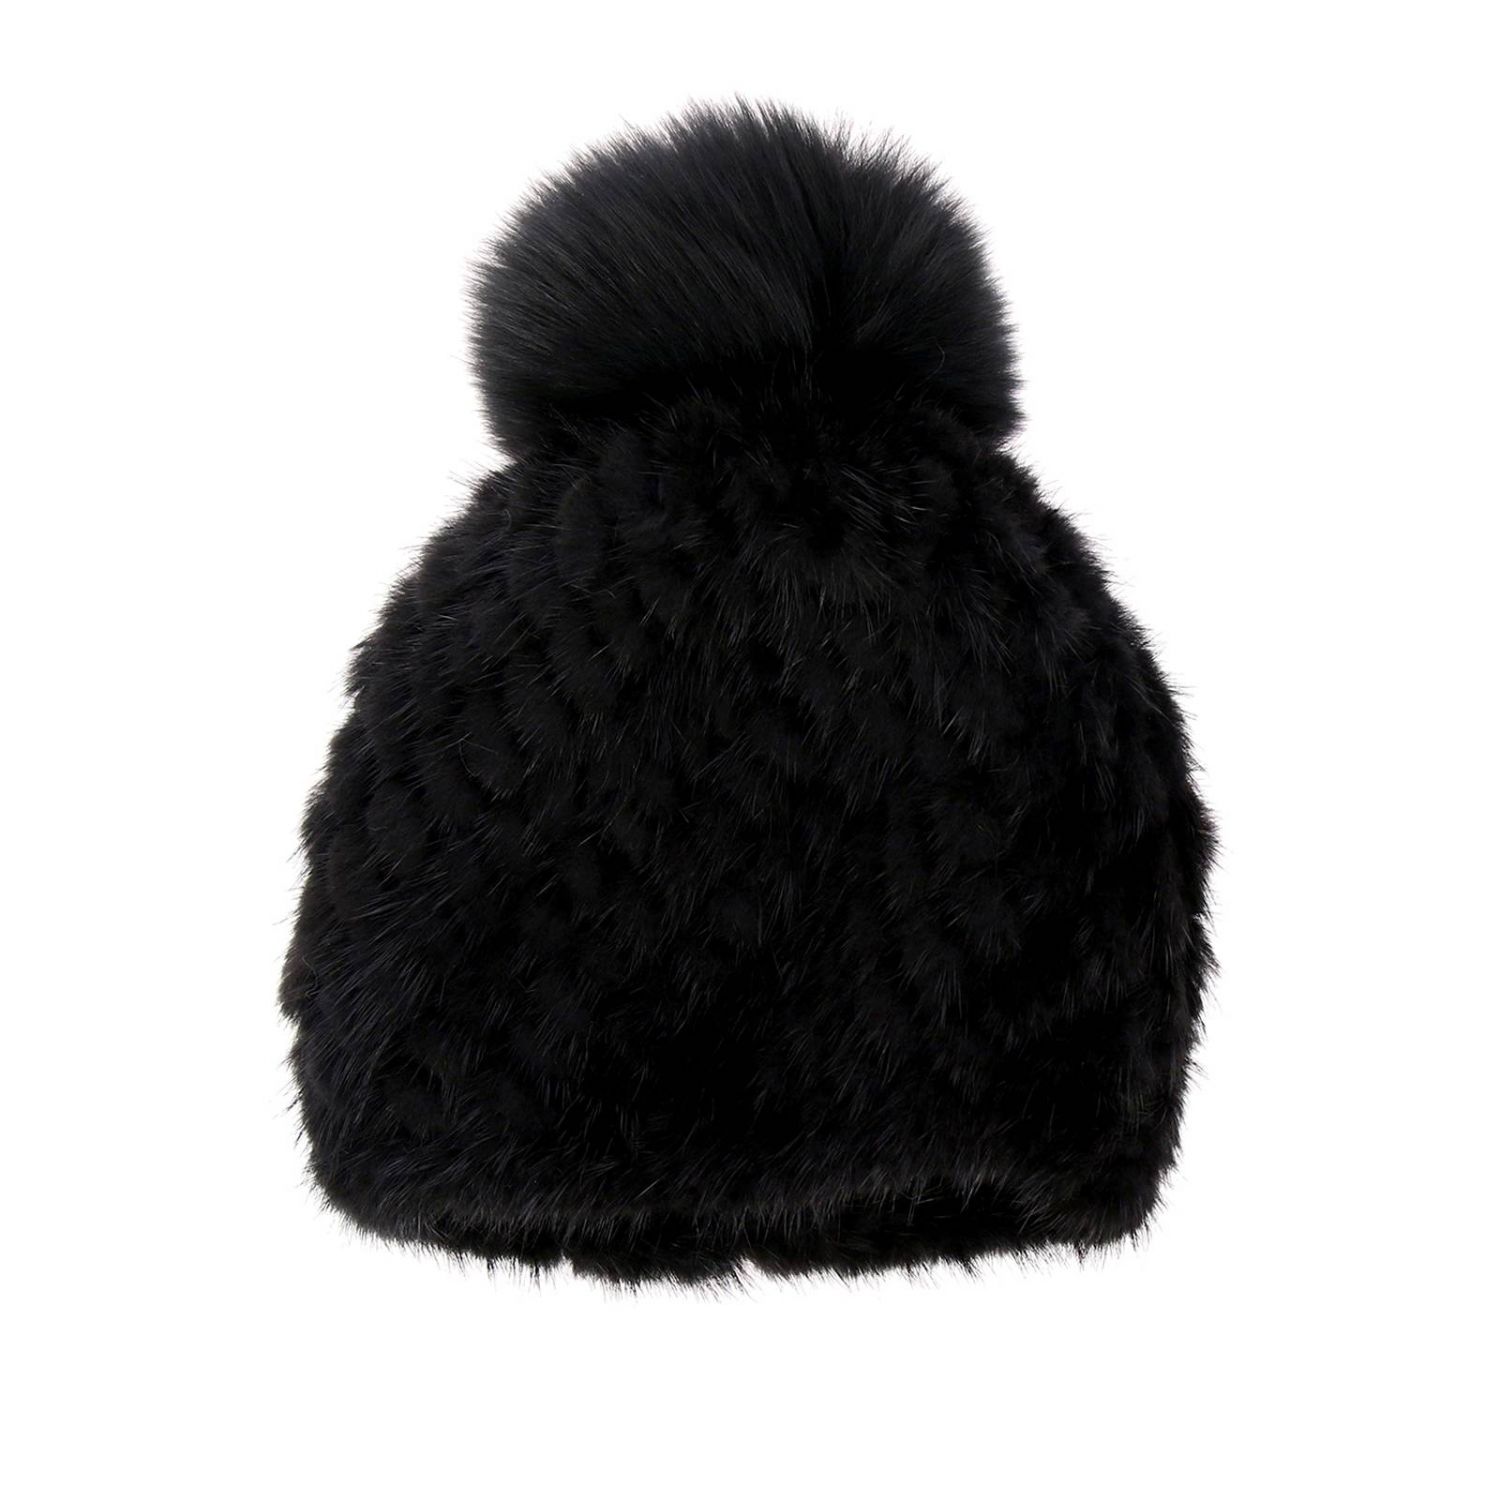 Max Mara Outlet: Delia hat in knitted mink with fur pompom - Black